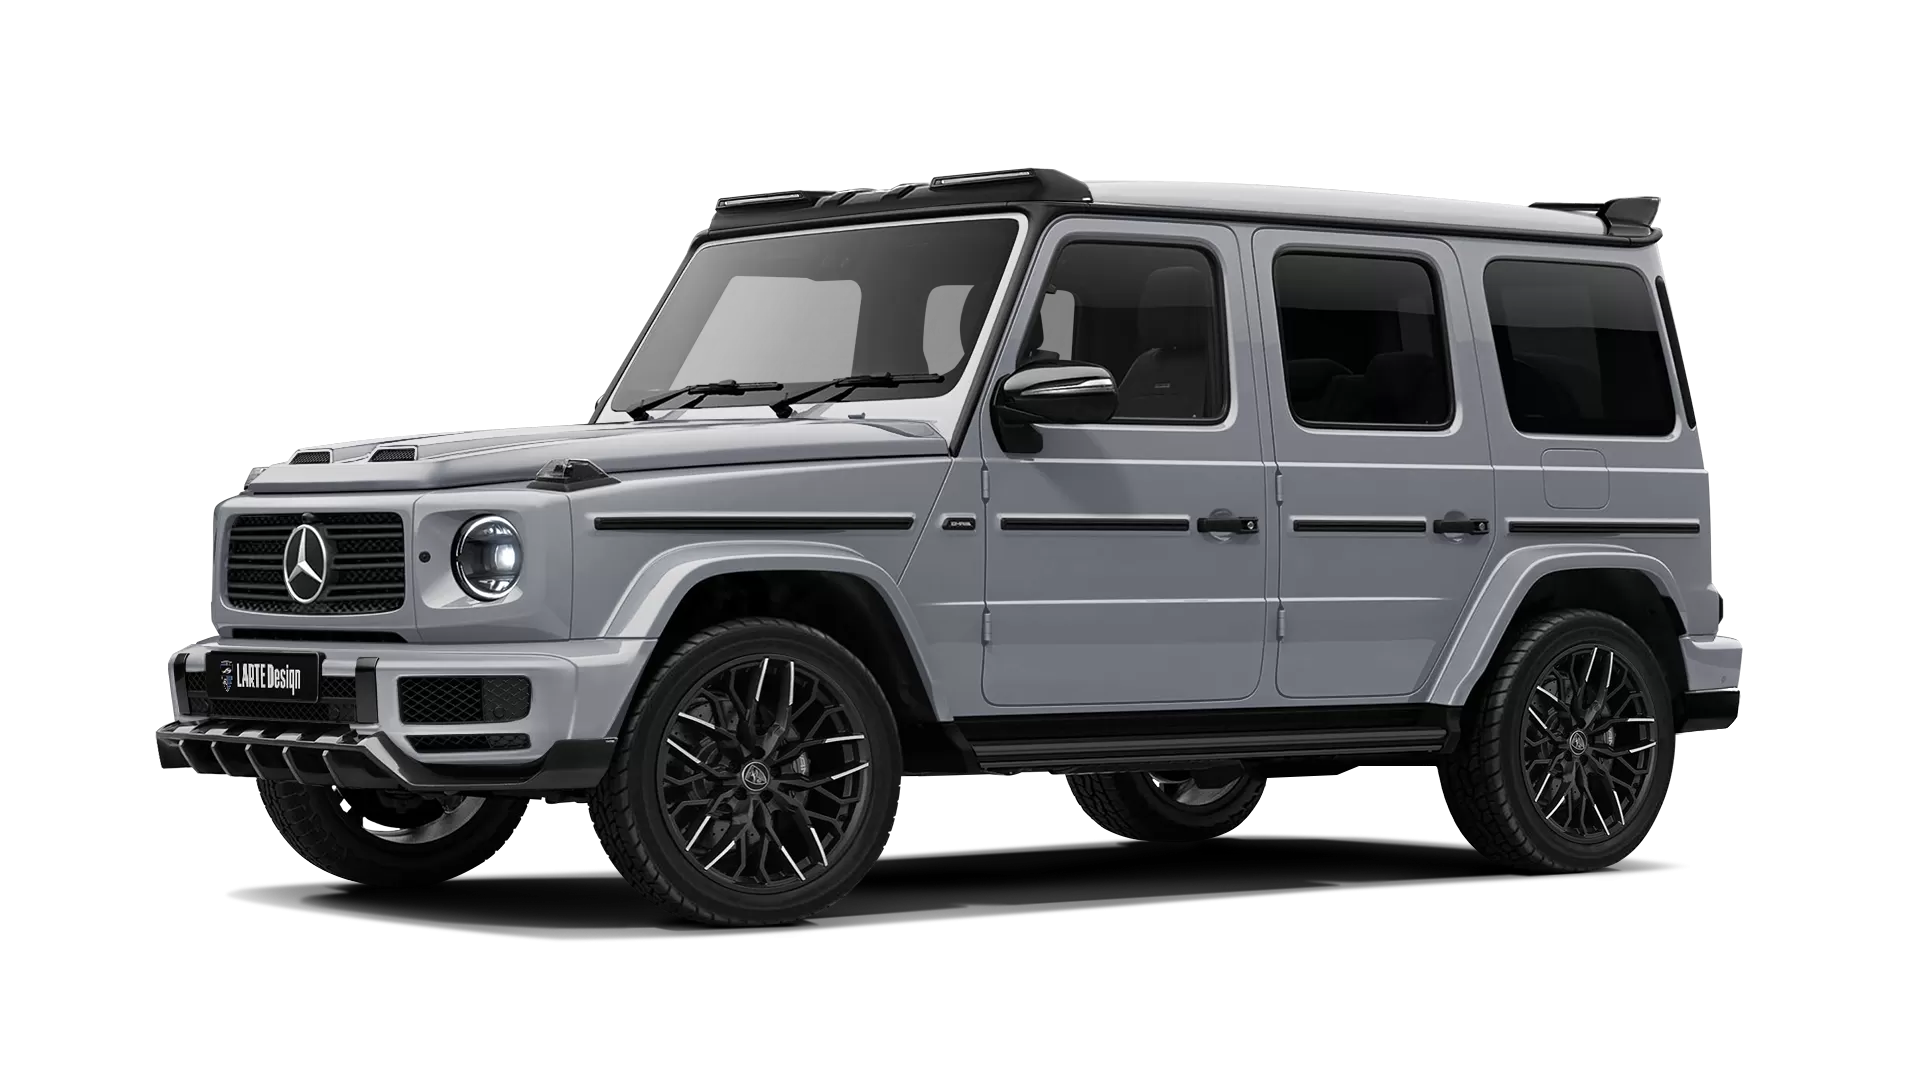 Mercedes G class W463 with painted body kit: front view shown in Iridium Silver